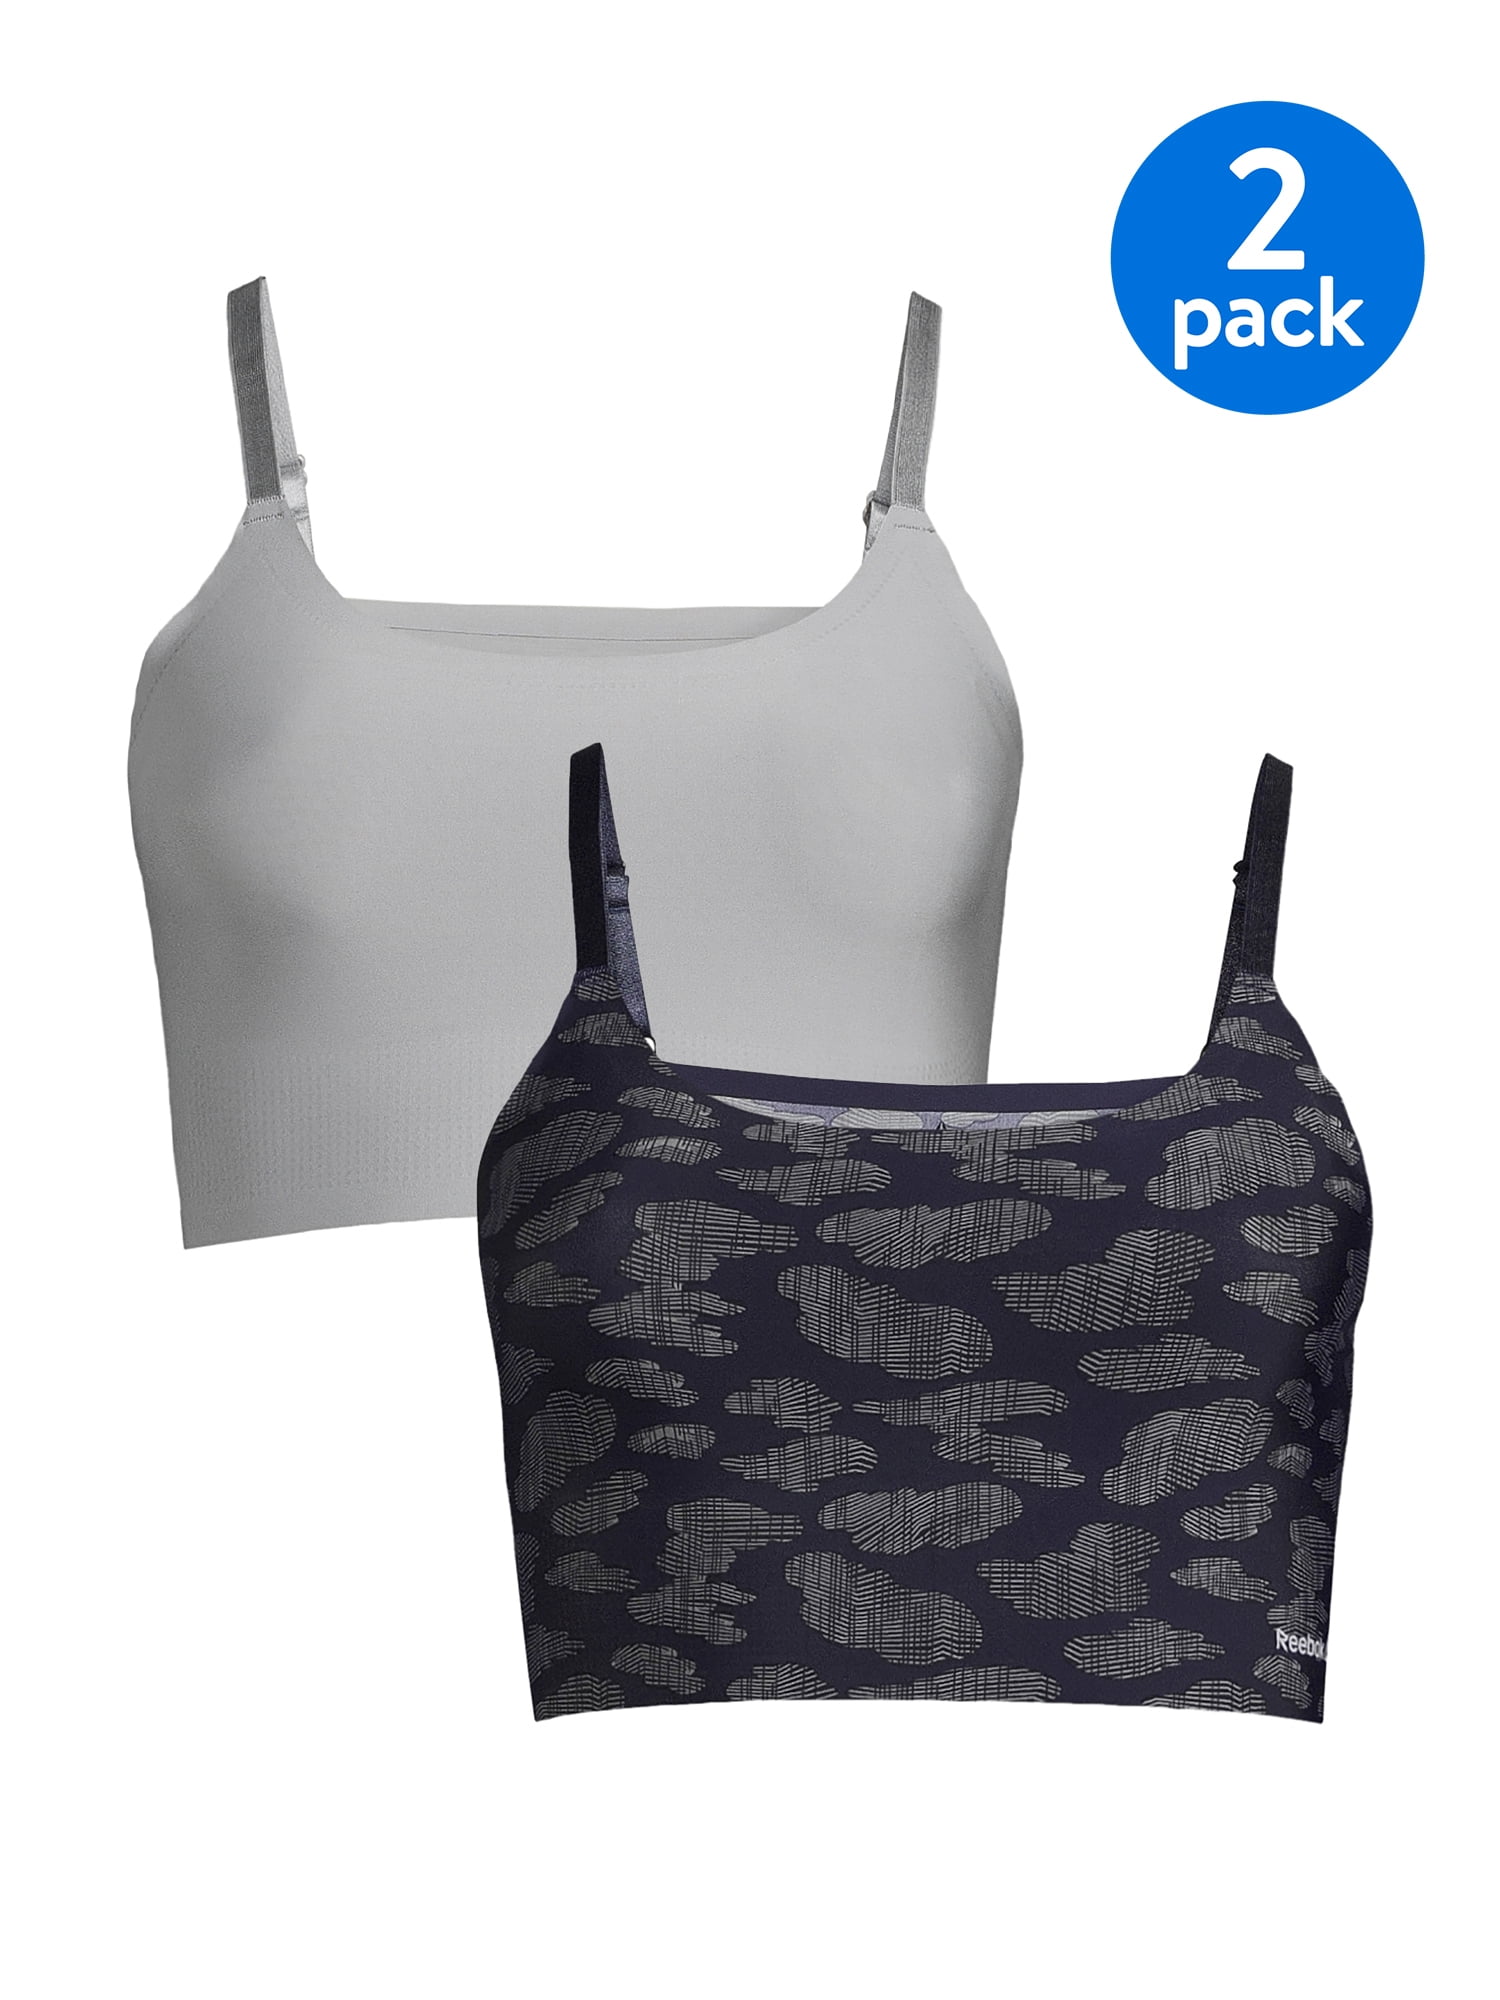 4 Pack Reebok Girls’ Bralette Racerback Seamless Longline Cami Bralette with Removable Pads